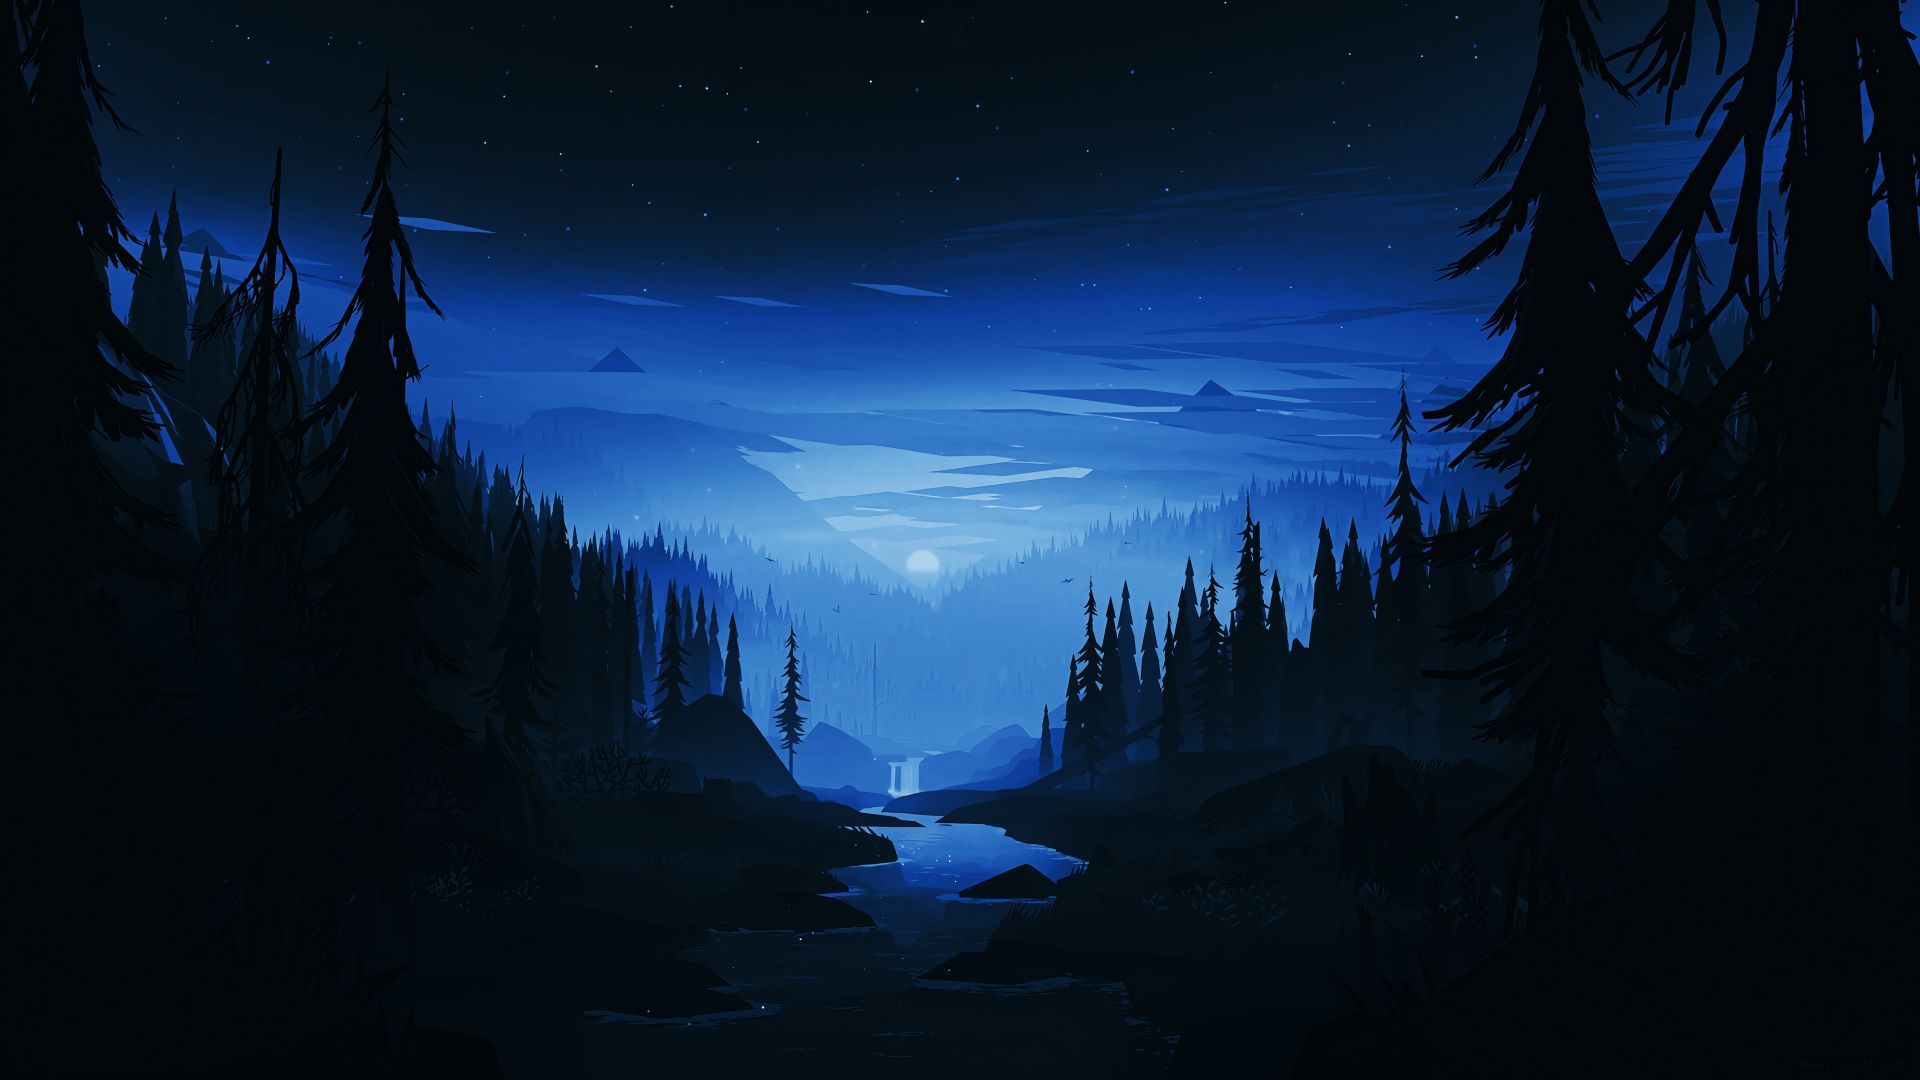 Dark night, river, forest, minimal, art wallpaper, HD image, picture, background, 95afc8